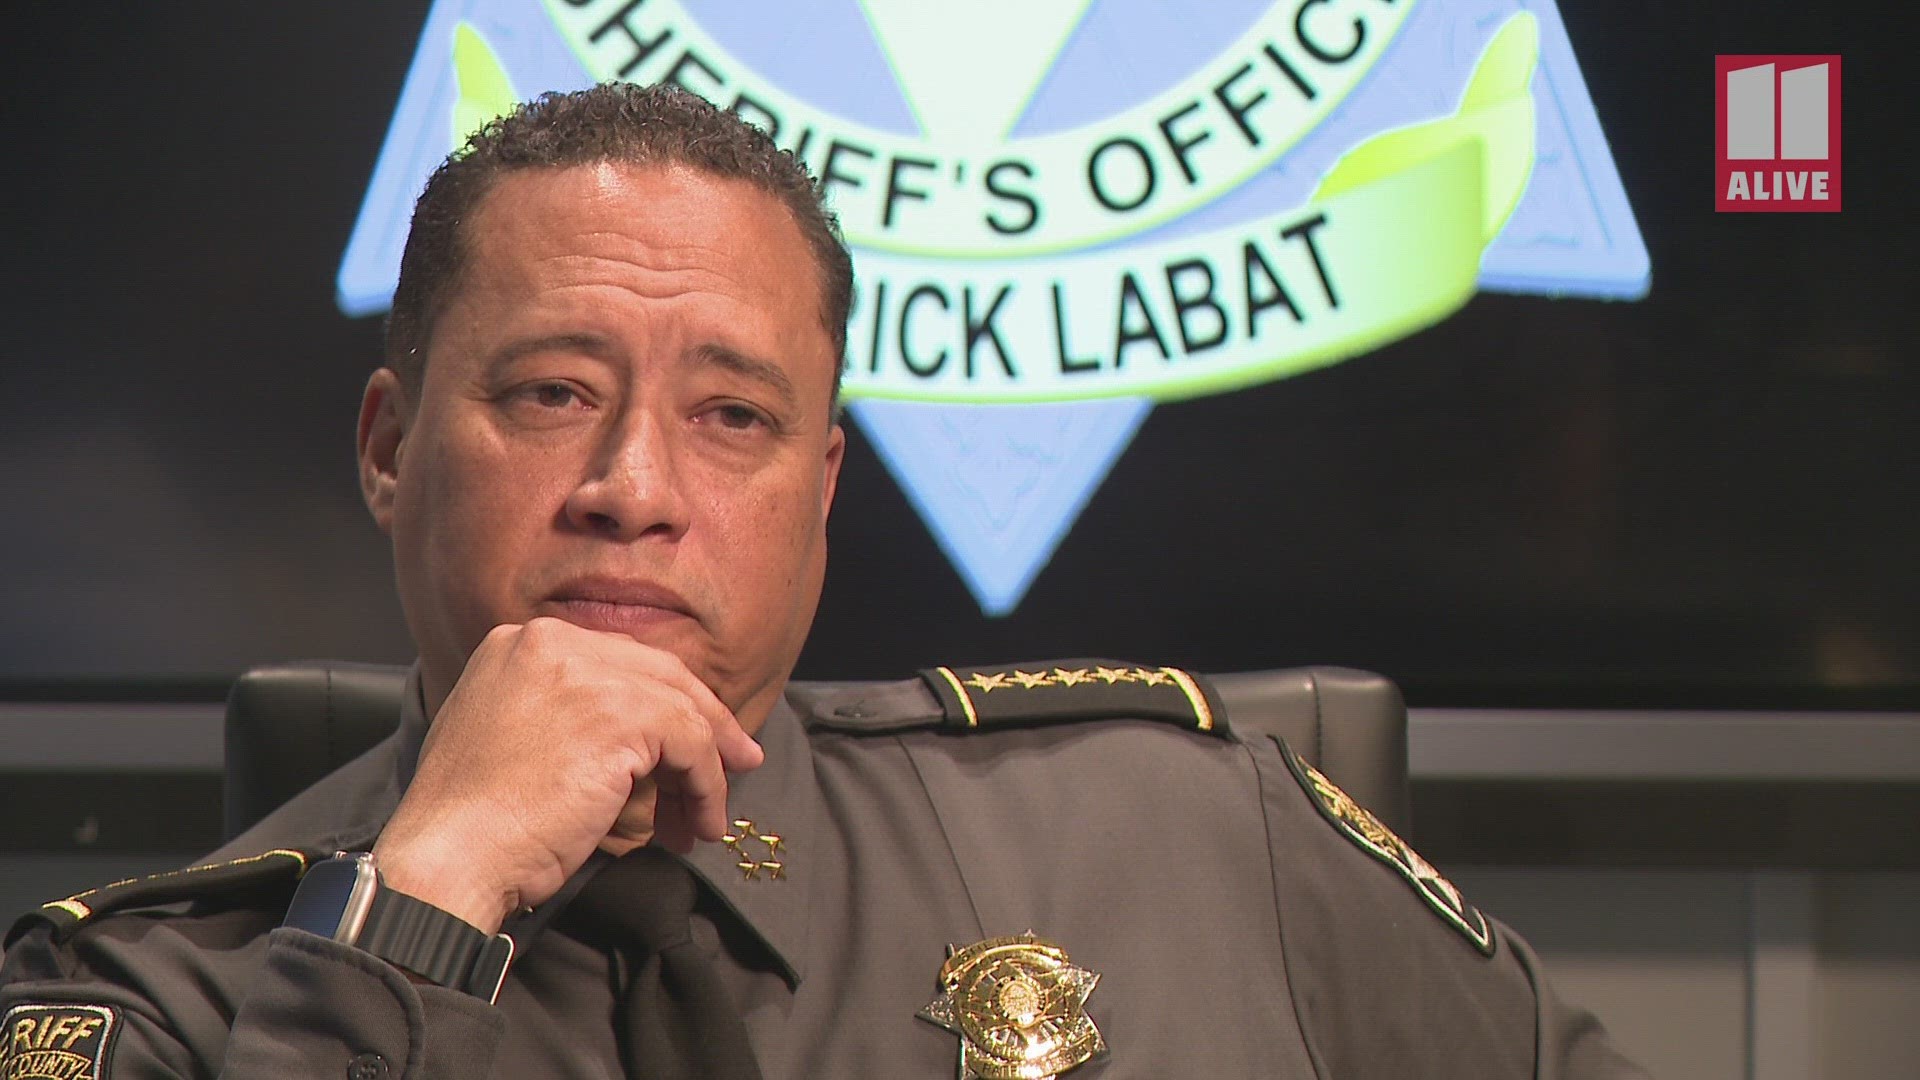 Just days after Thompson's family spoke out, Labat requested the resignations of several of the jail's staff.